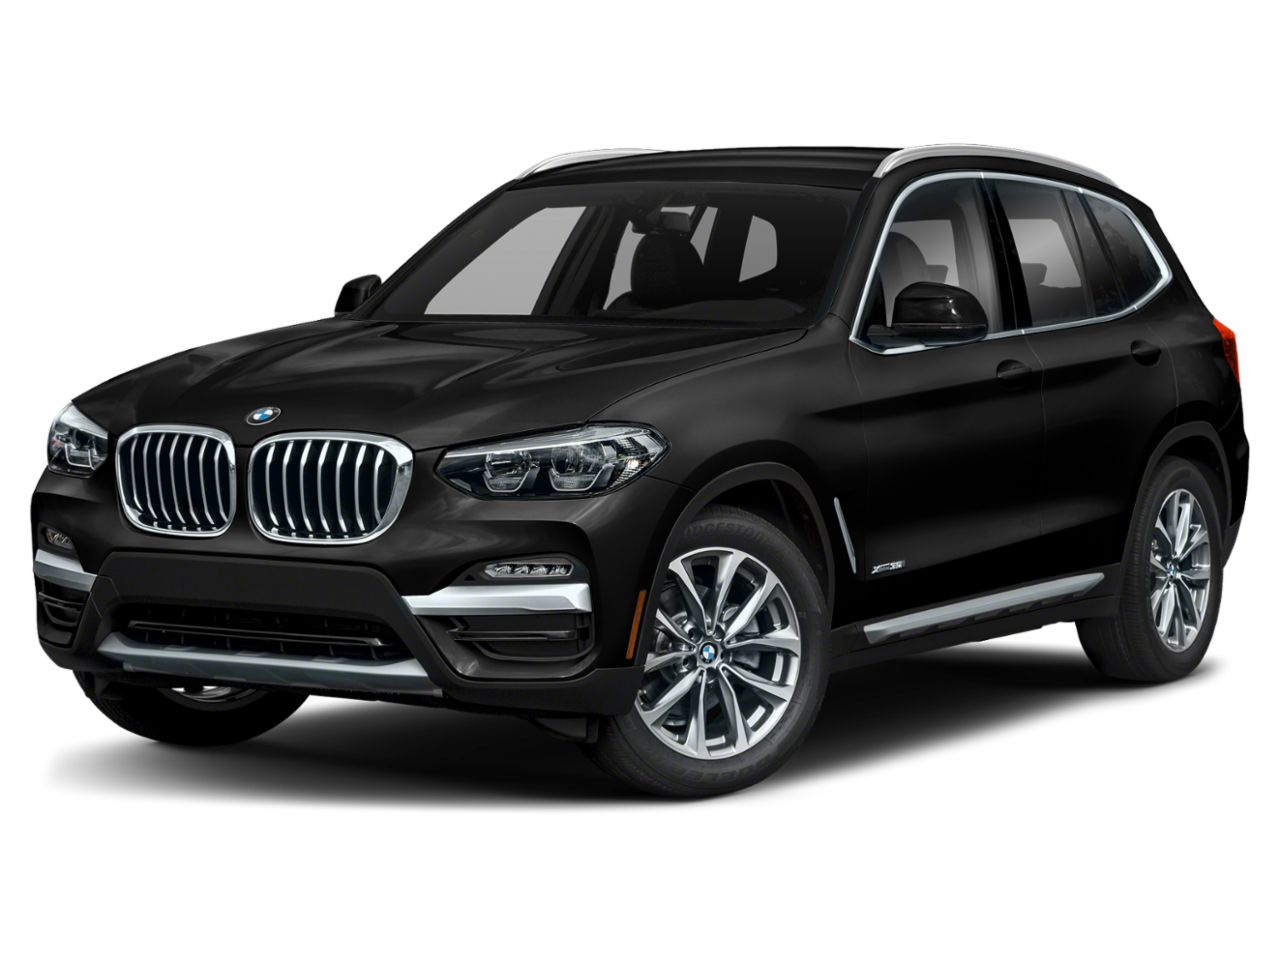 New 2022 BMW X3 sDrive30i Details from Garlyn Shelton Auto Group's